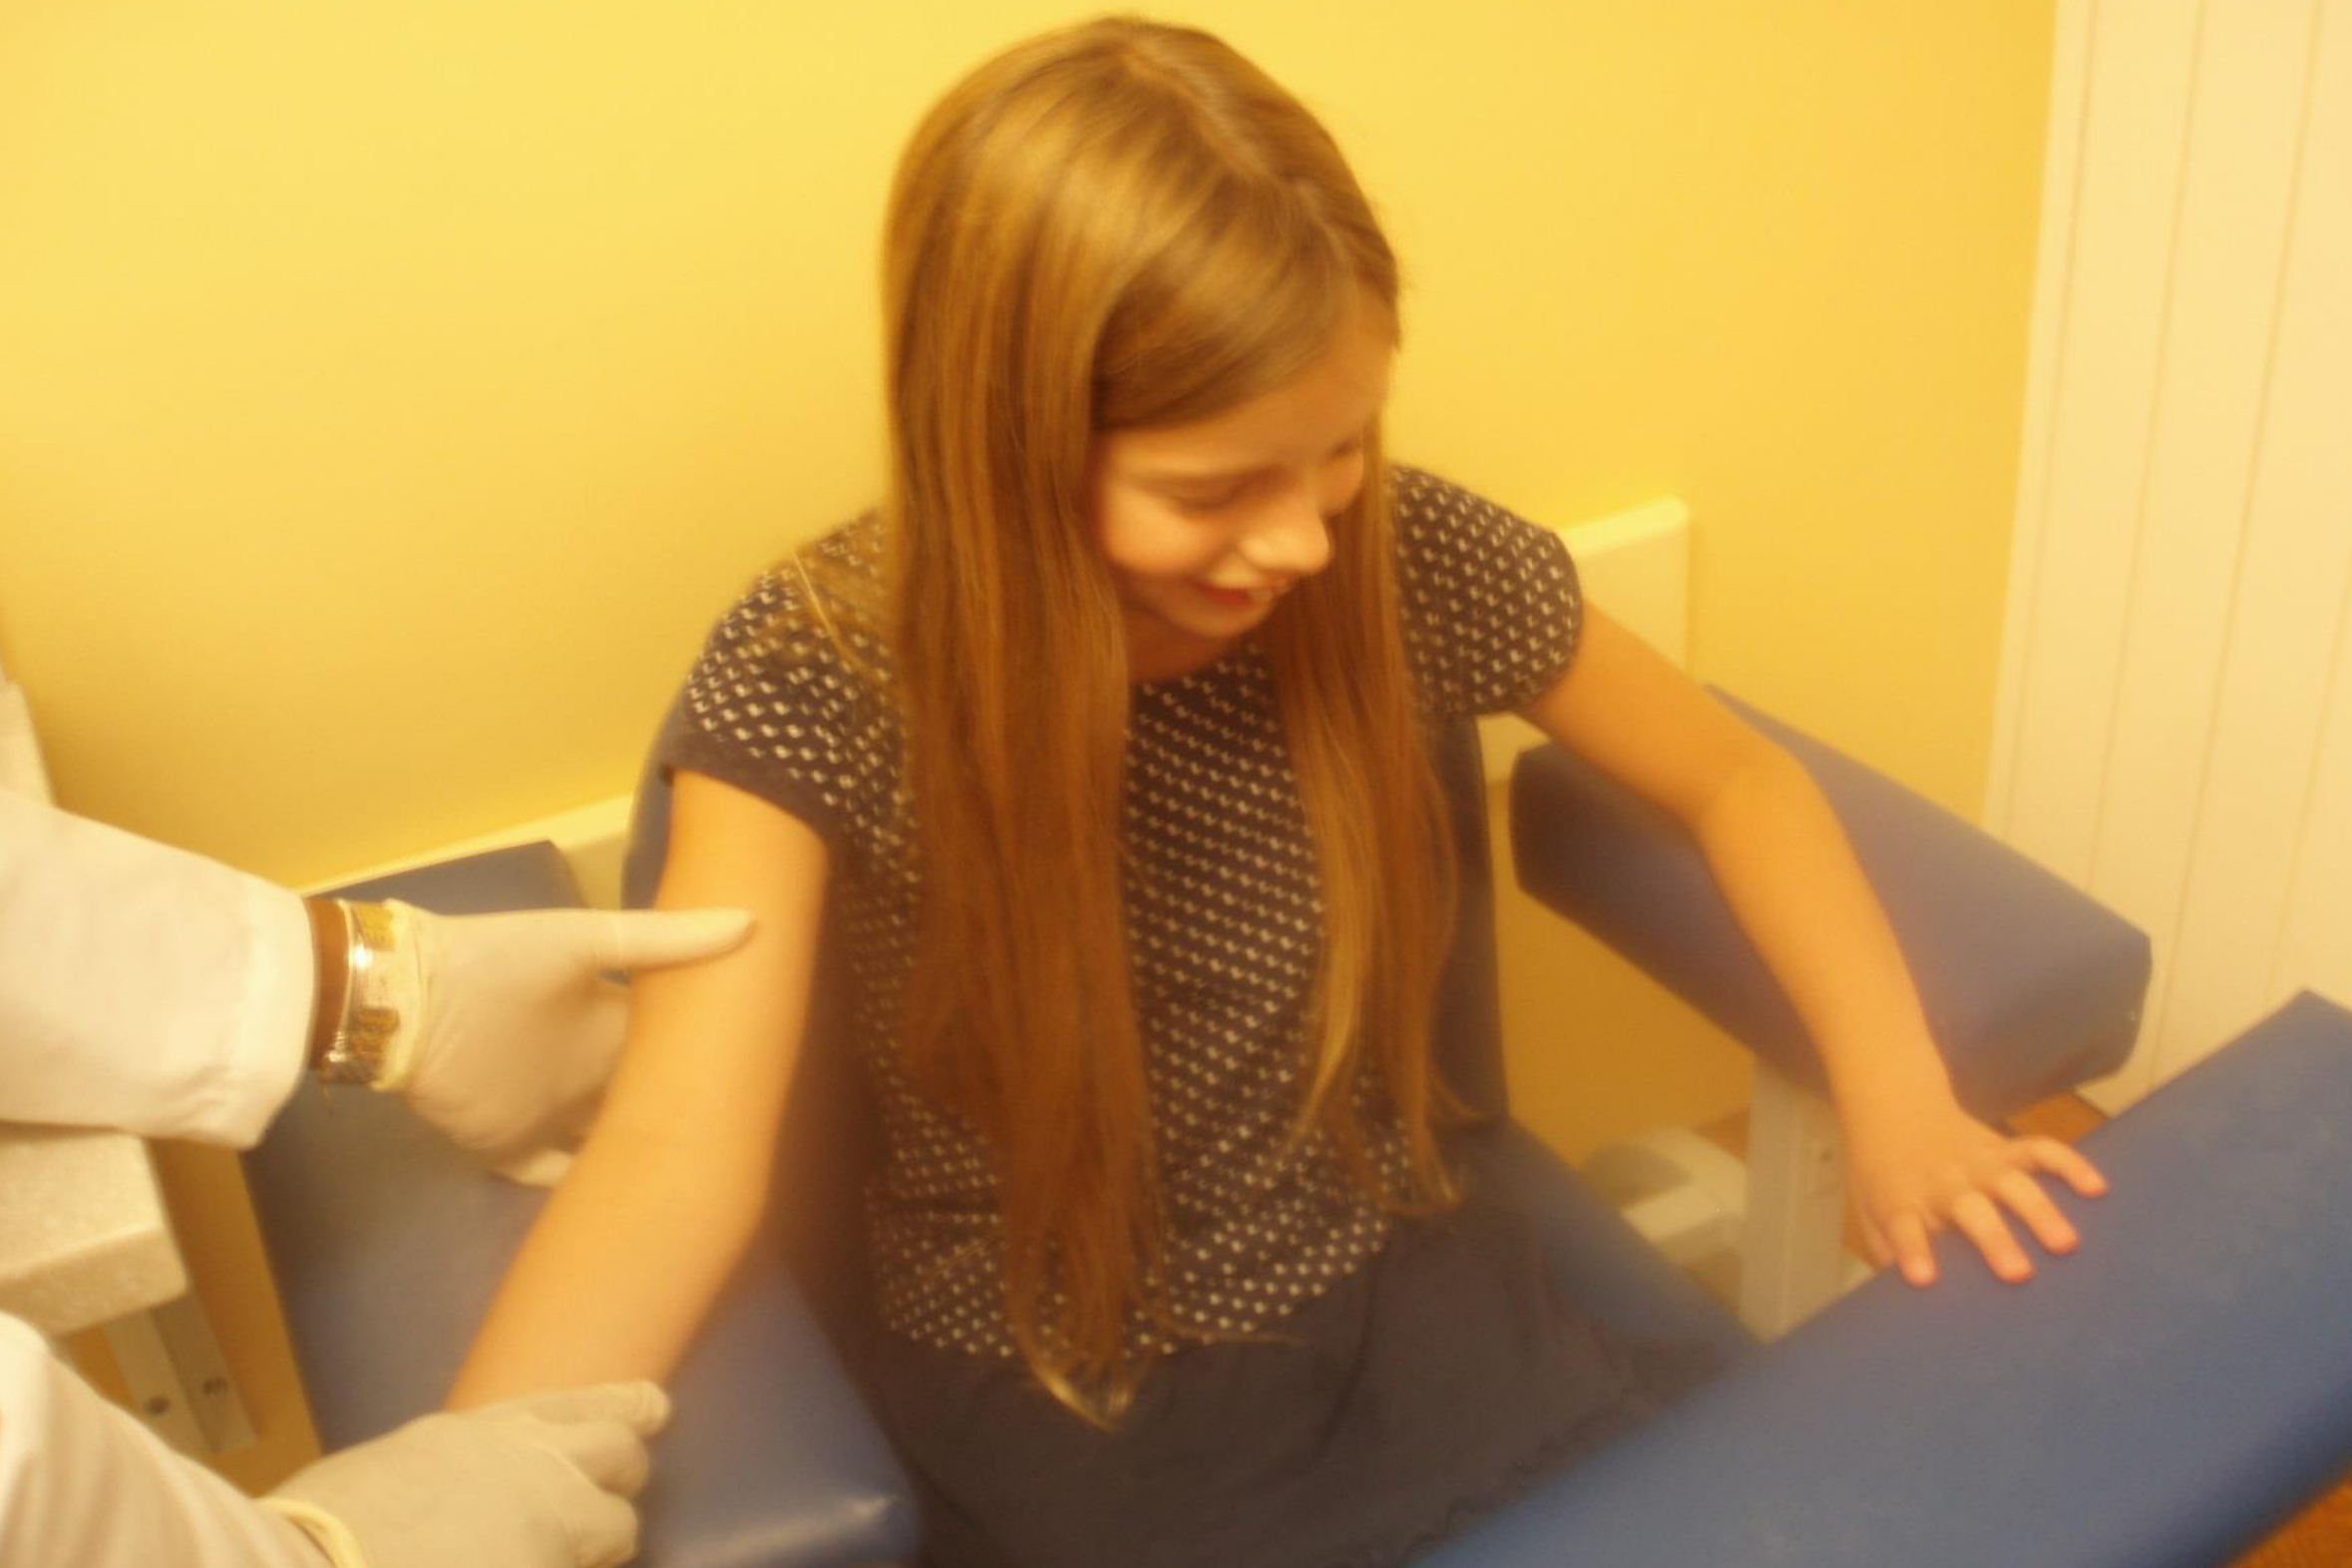 My Hospital Story: A girl's outpatient visit to the Phlebotomy Clinic